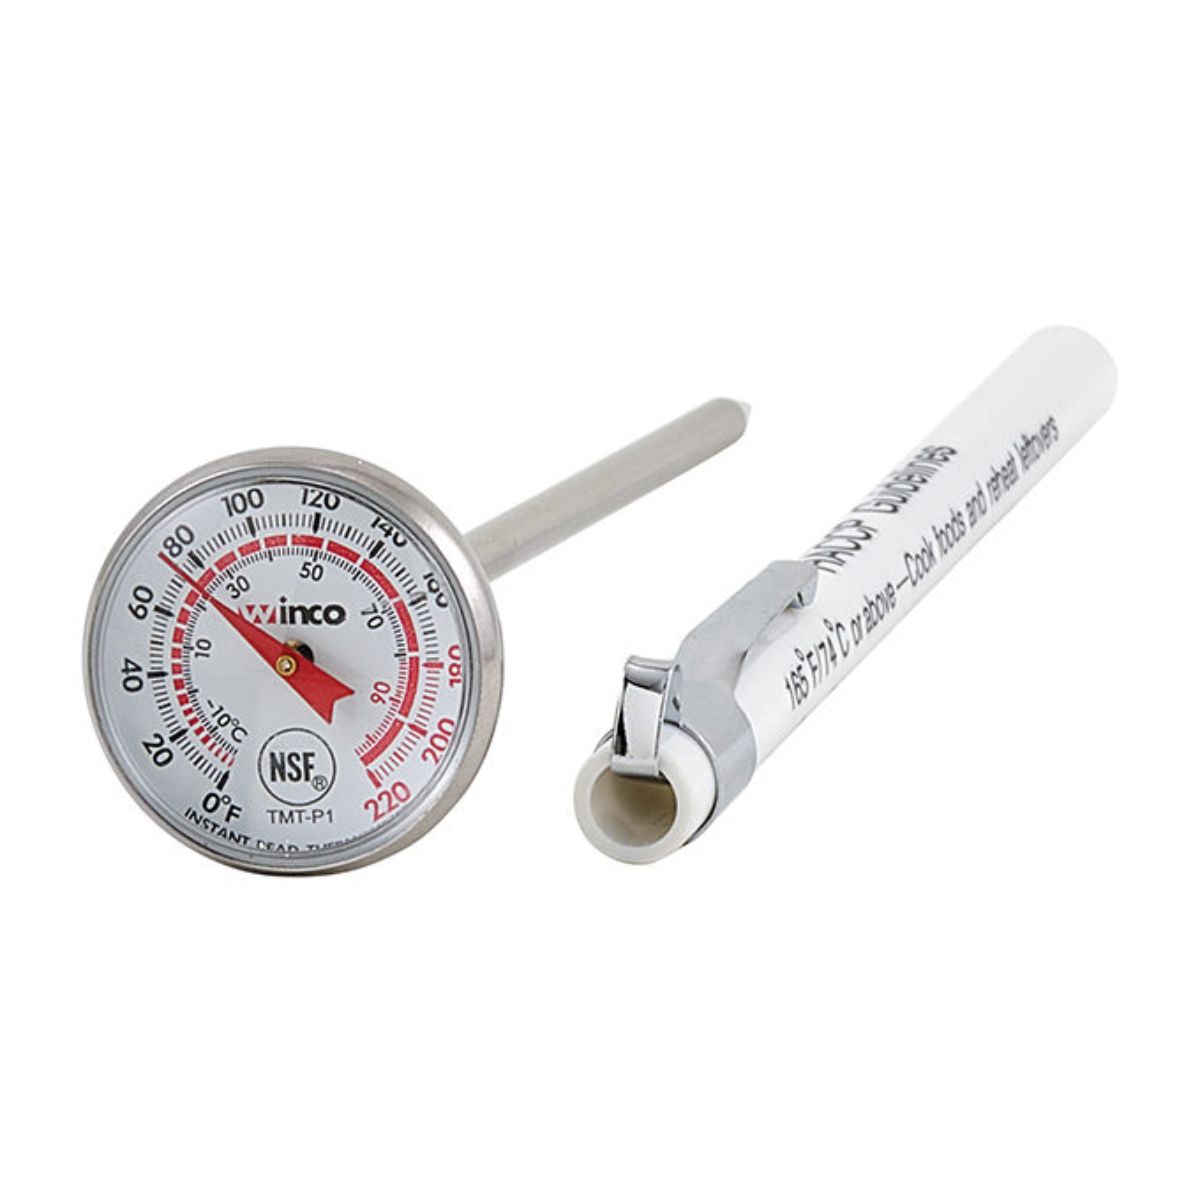 Winco Pocket Test Thermometer 0 to 220F